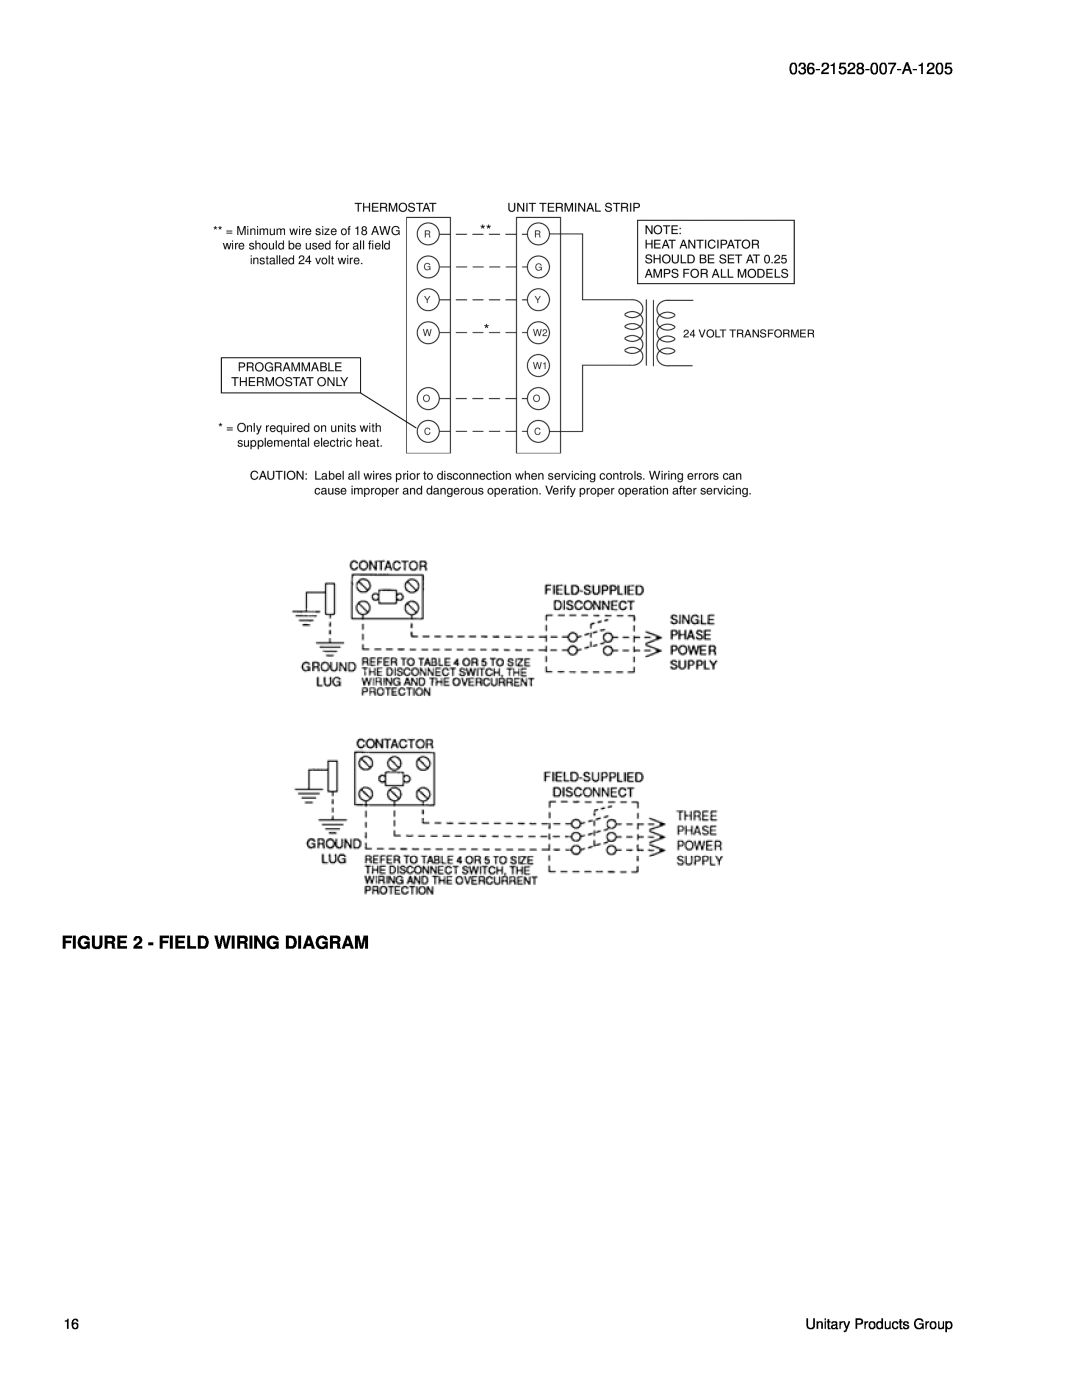 York BHP024 Field Wiring Diagram, Unitary Products Group, Thermostat, Unit Terminal Strip, = Minimum wire size of 18 AWG R 